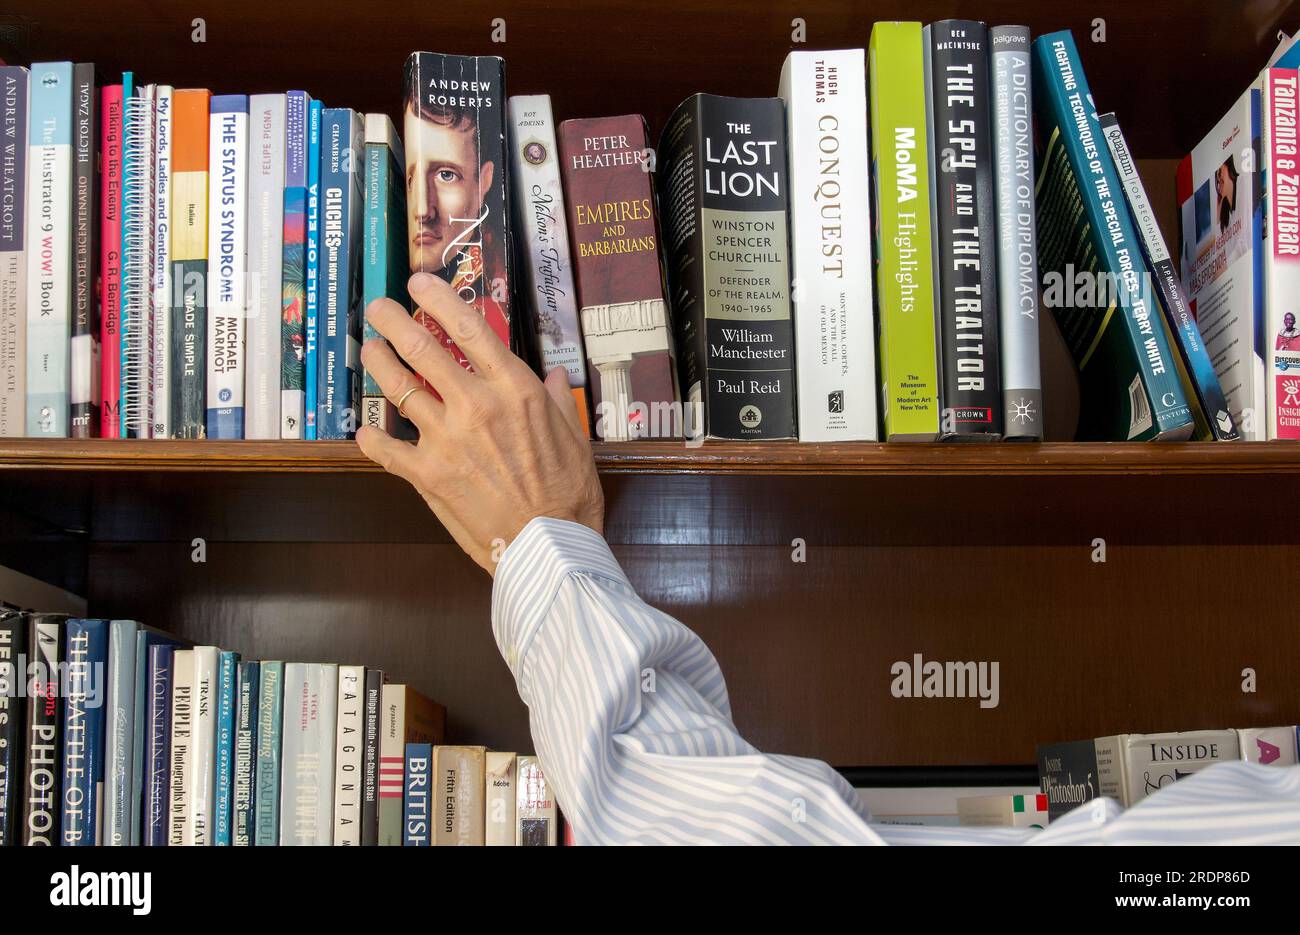 Hand reaching up for a book on library shelf Stock Photo